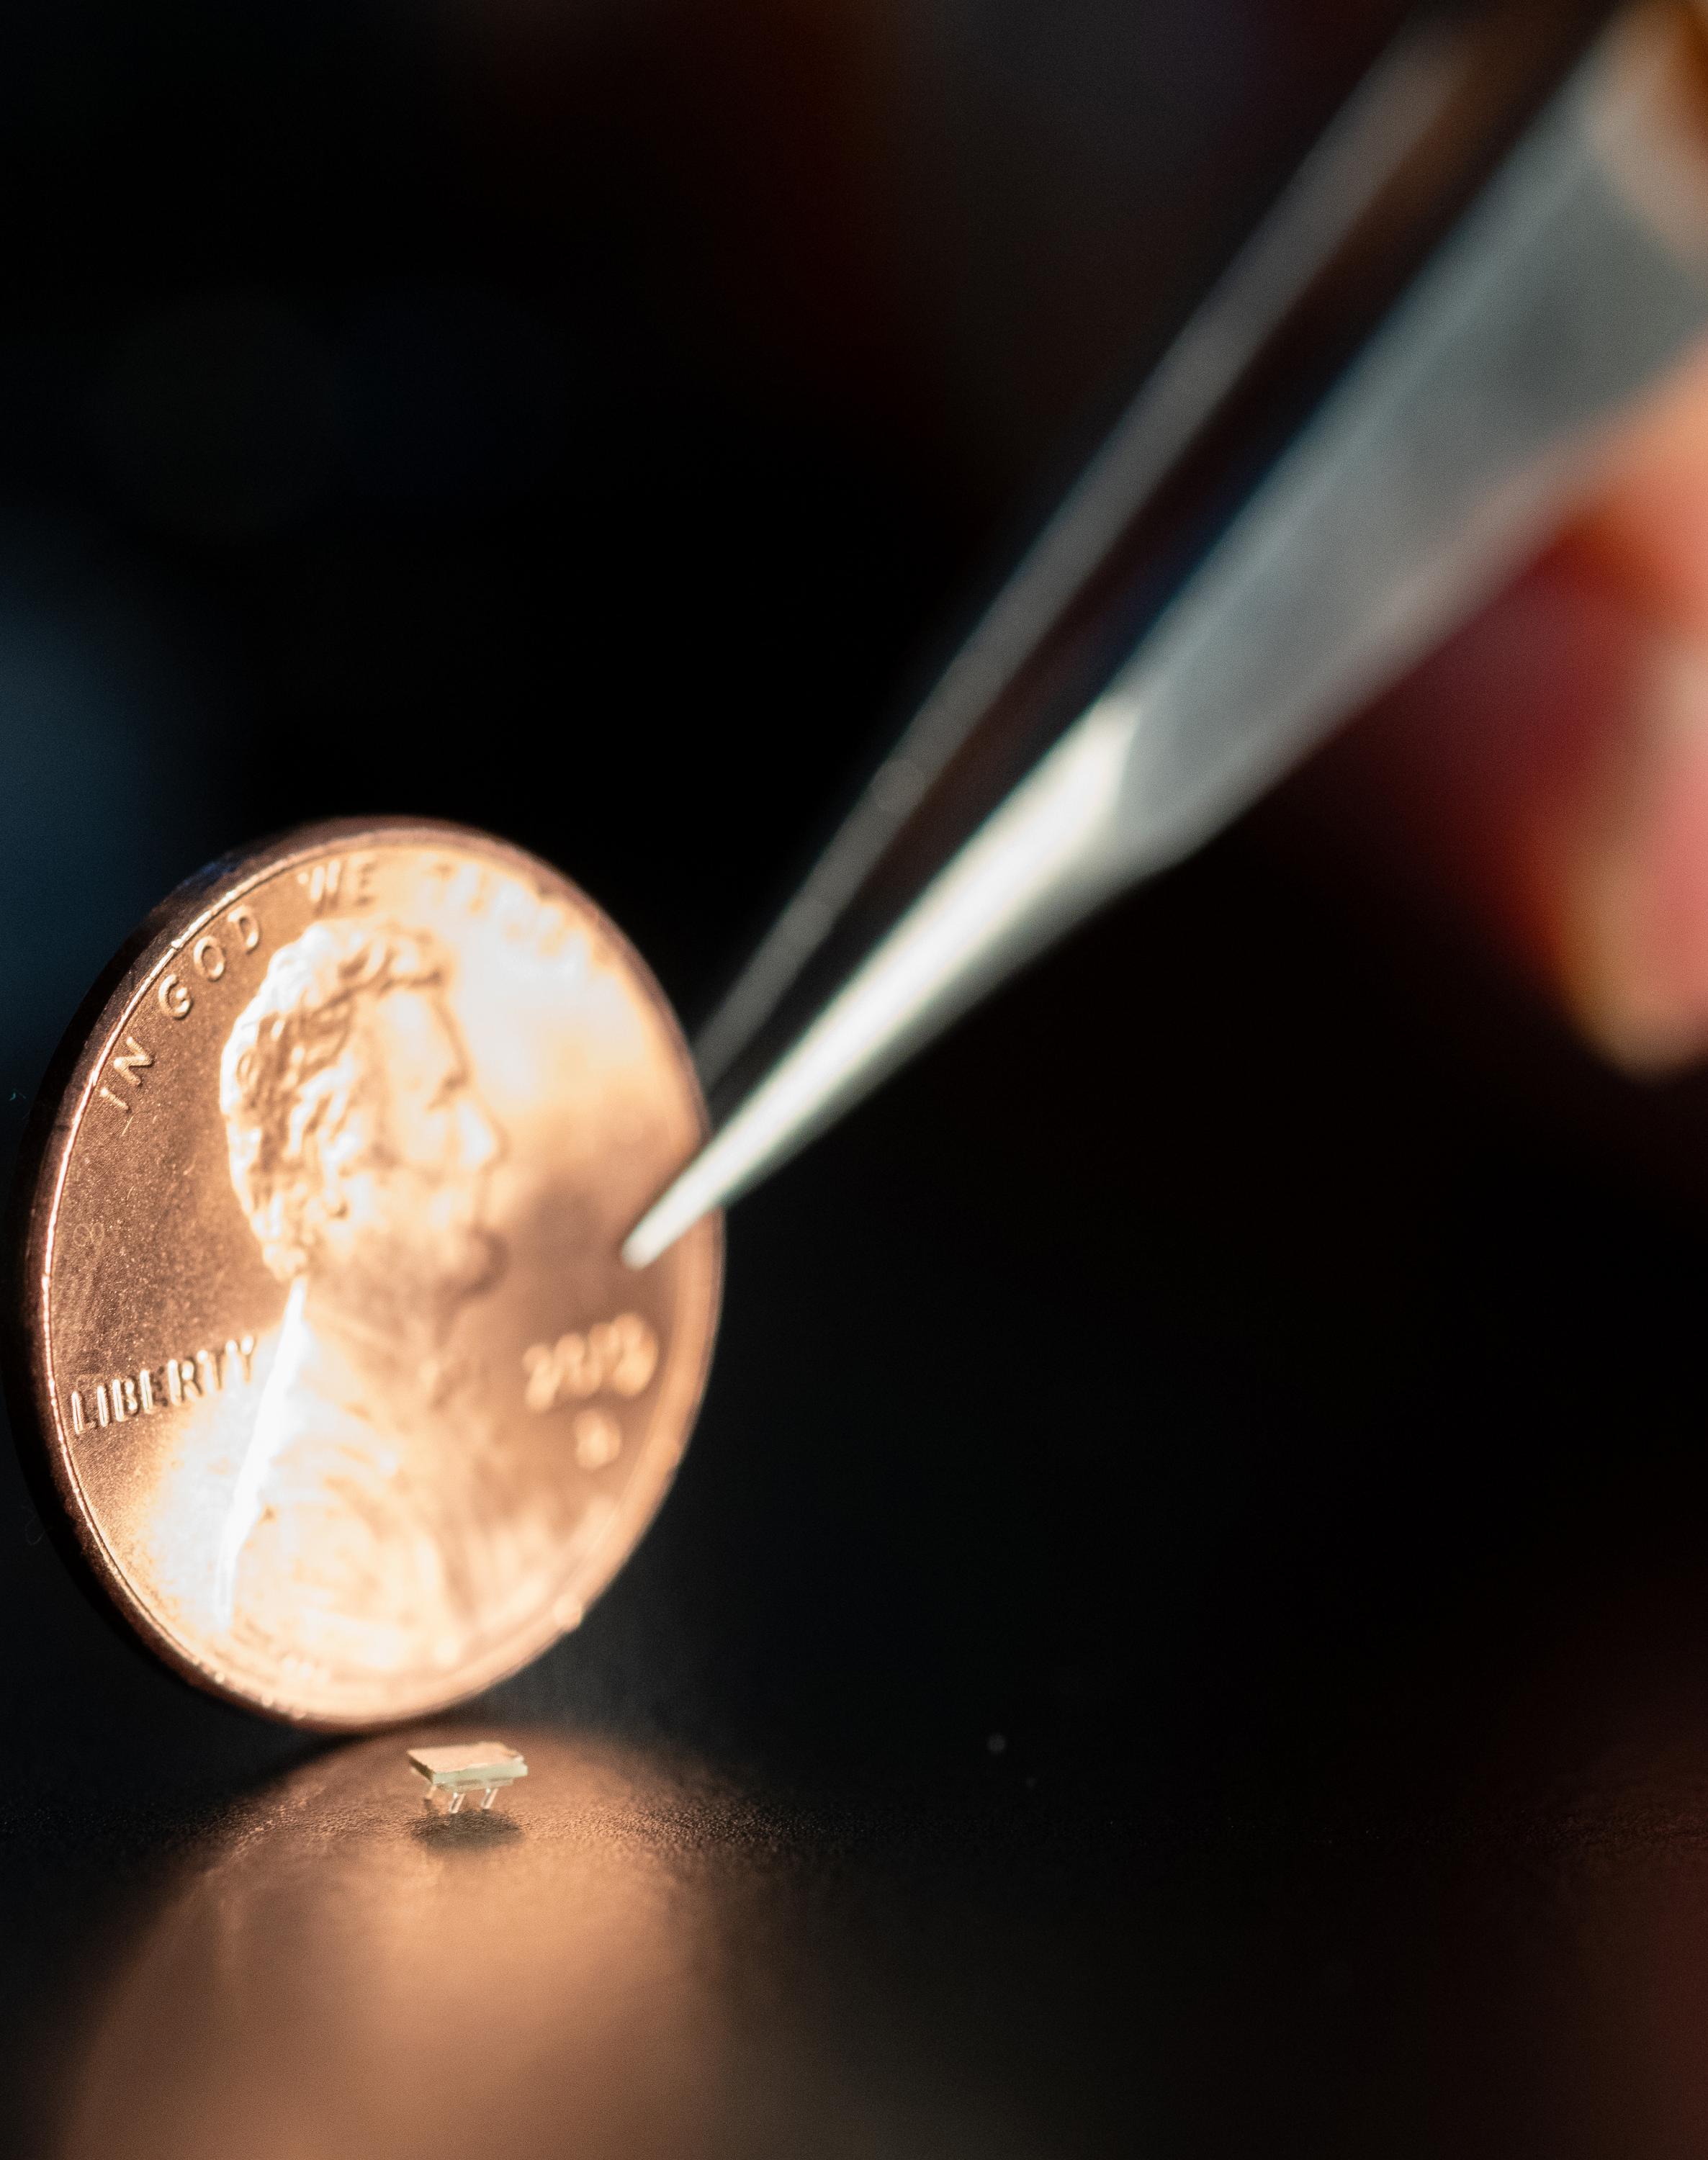 A micro-bristle-bot is shown next to a U.S. penny for size comparison. (Photo: Allison Carter)